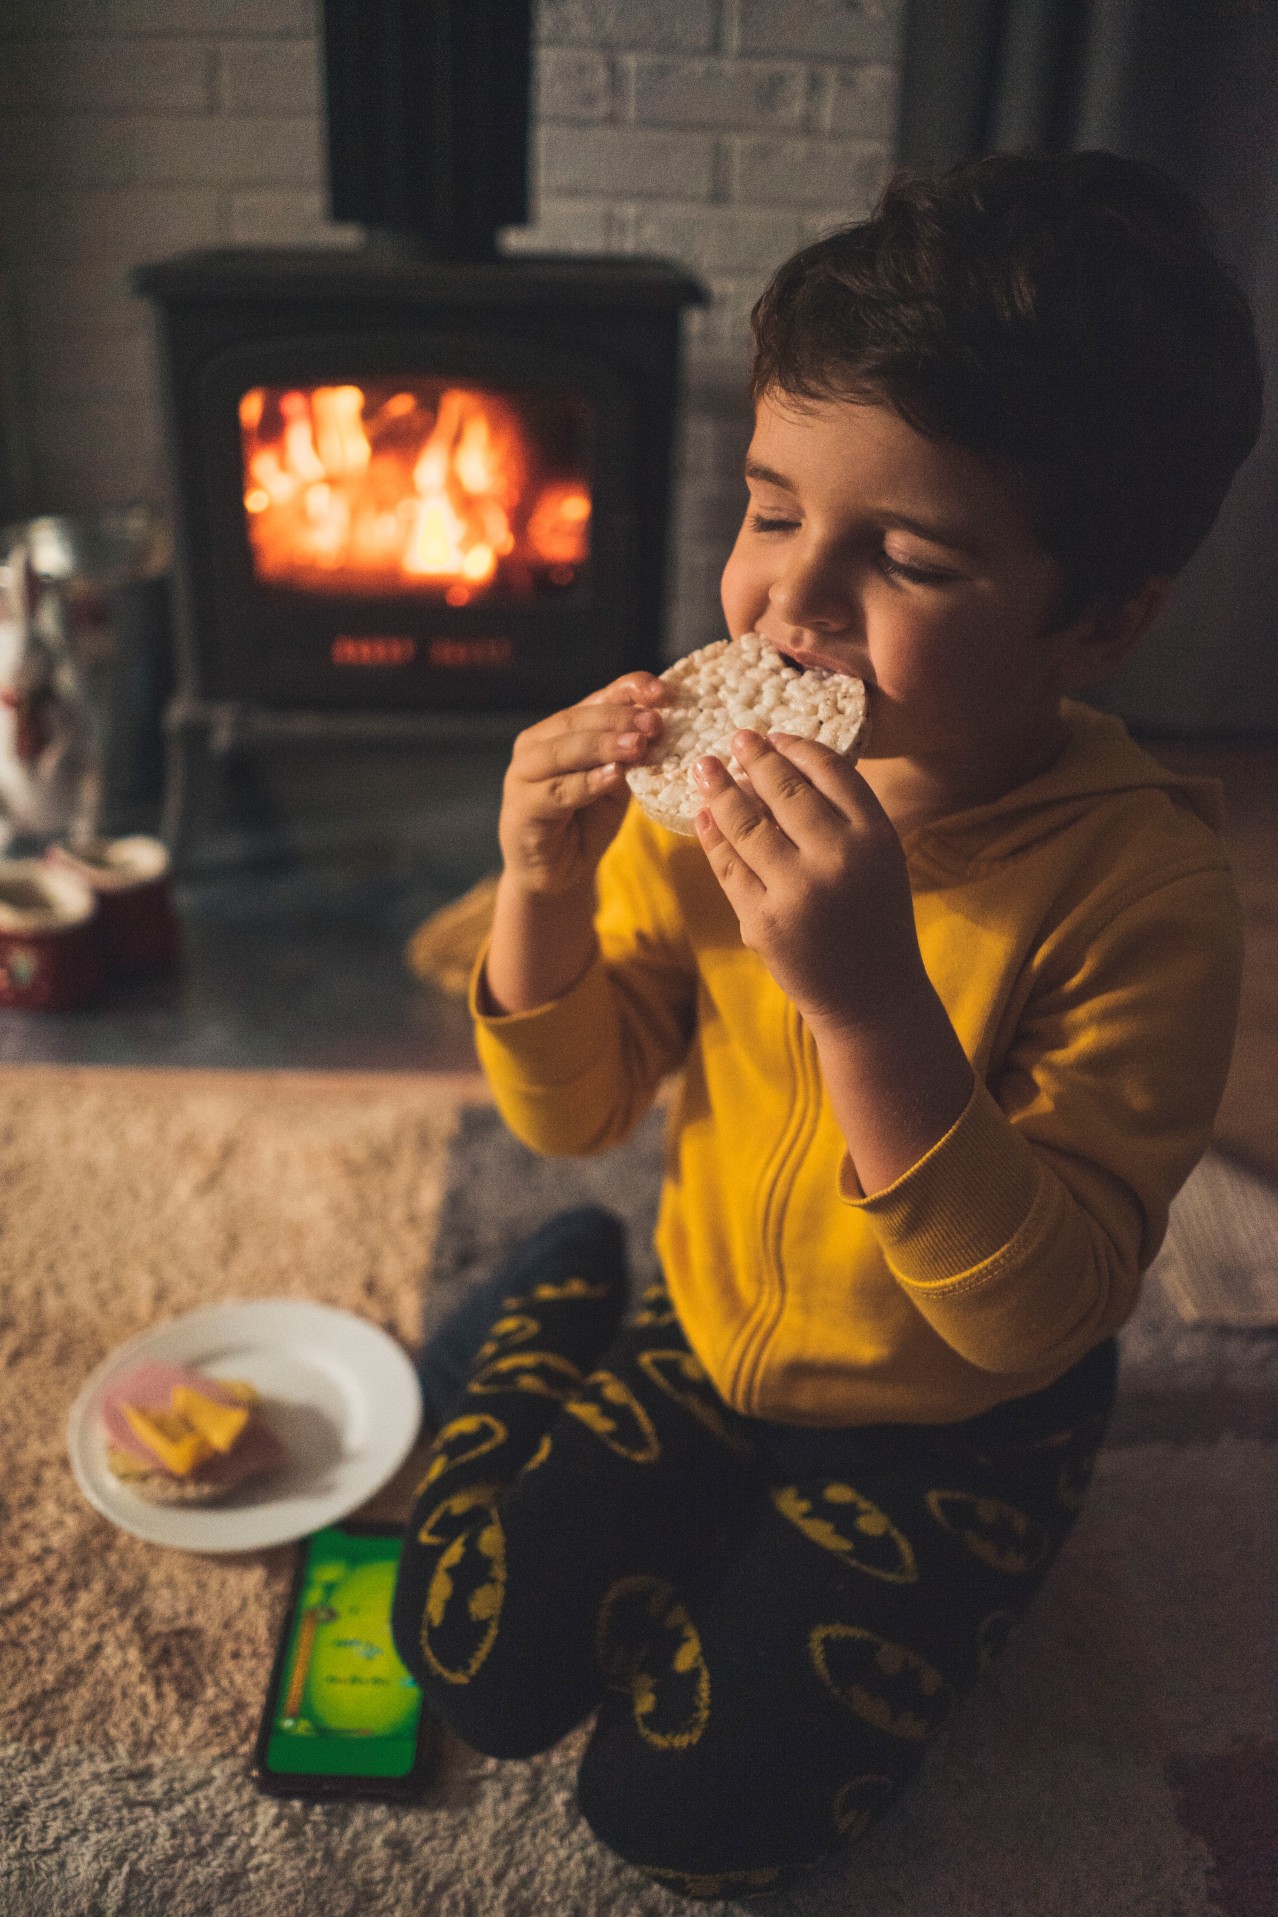 Boy with Cookies by the Fireplace